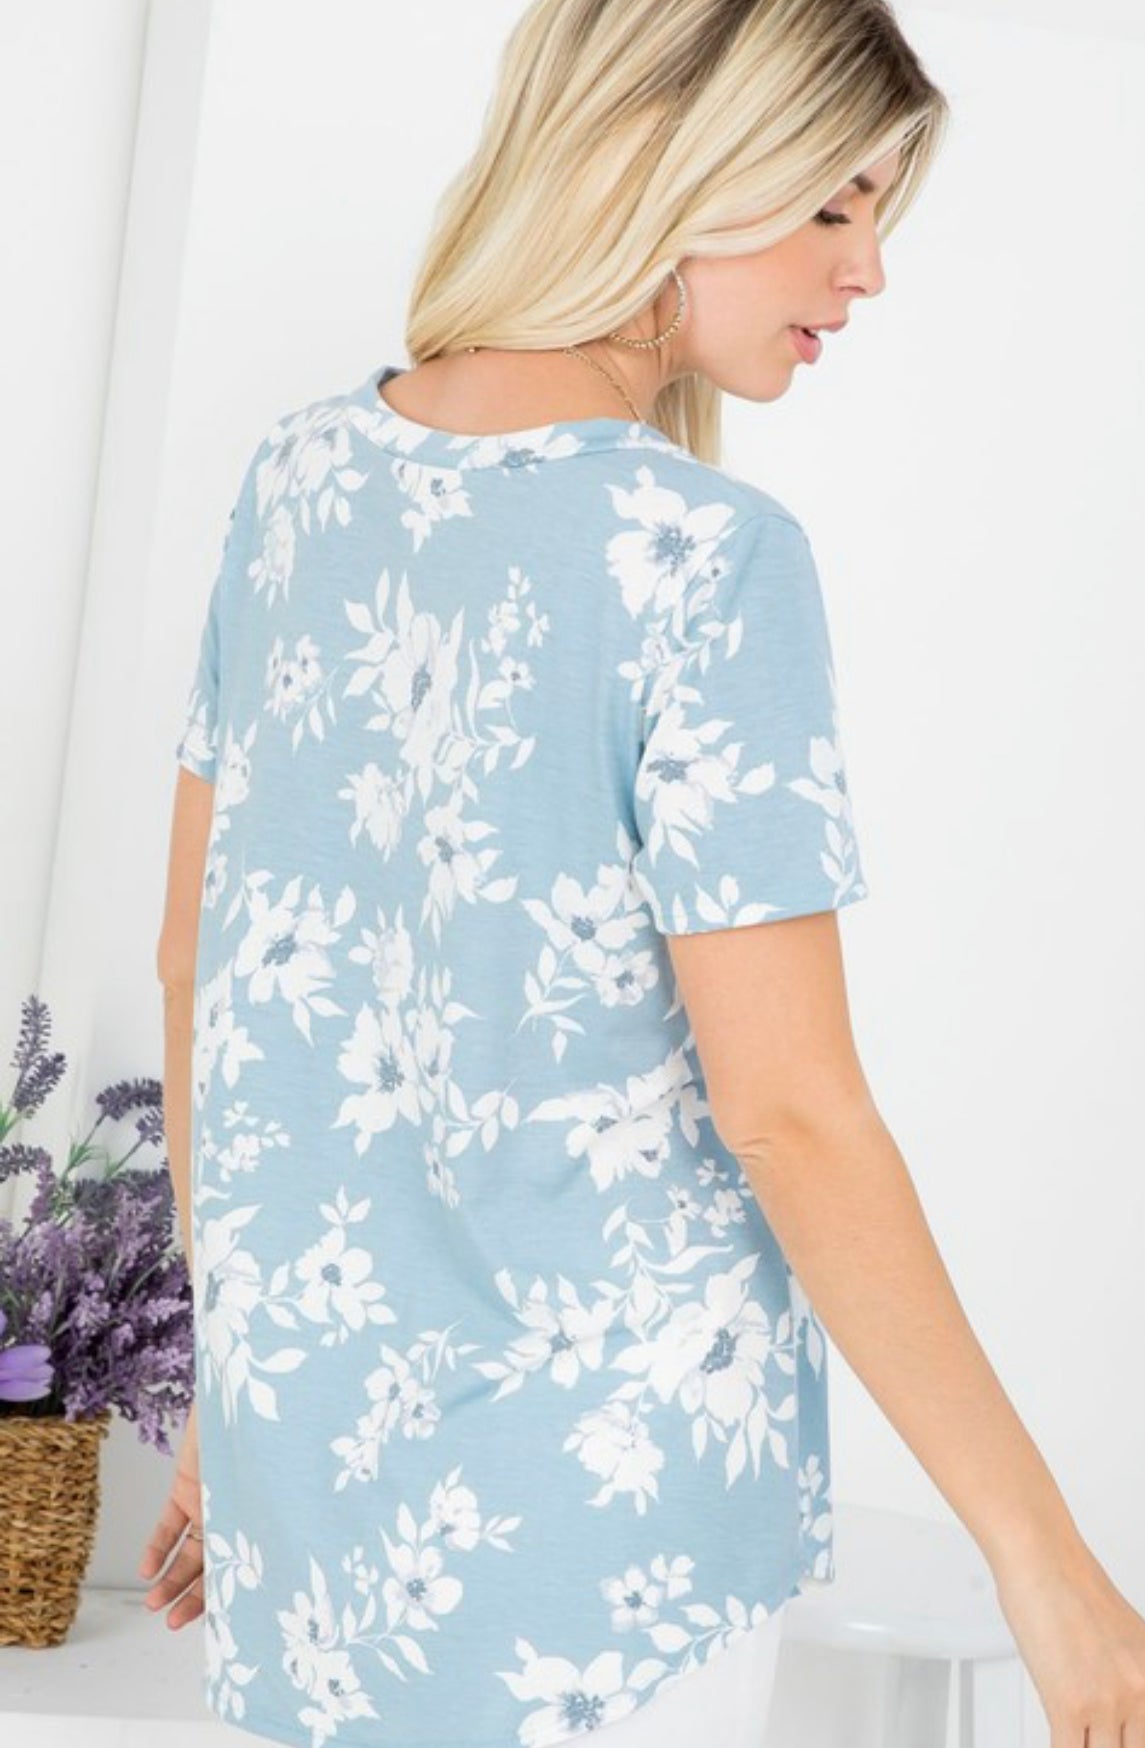 Blue Basic T with White Flowers